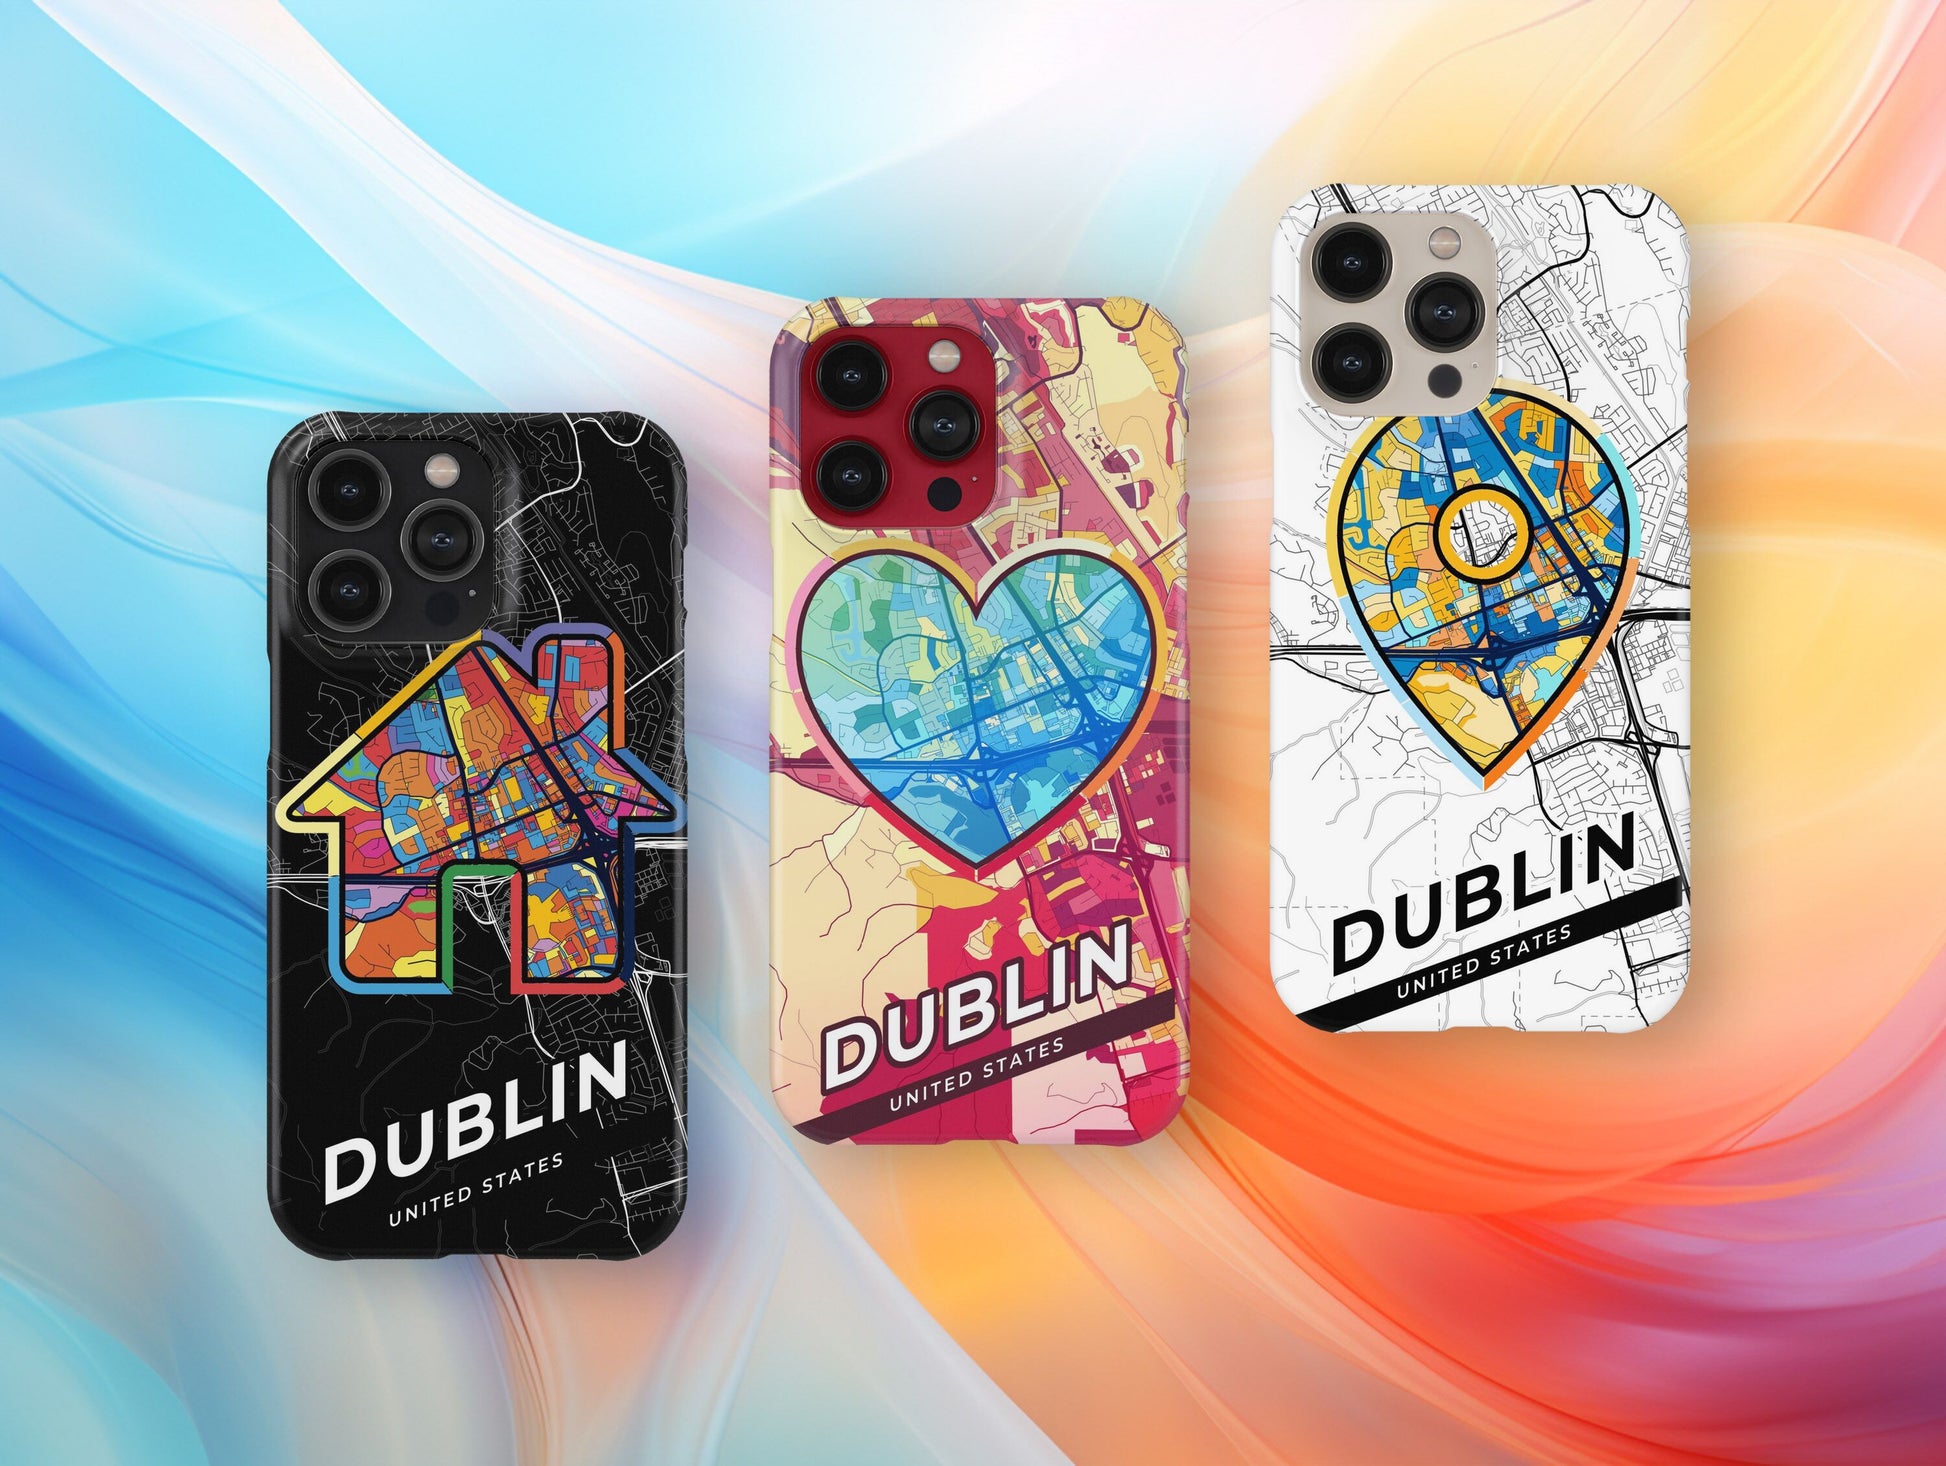 Dublin California slim phone case with colorful icon. Birthday, wedding or housewarming gift. Couple match cases.